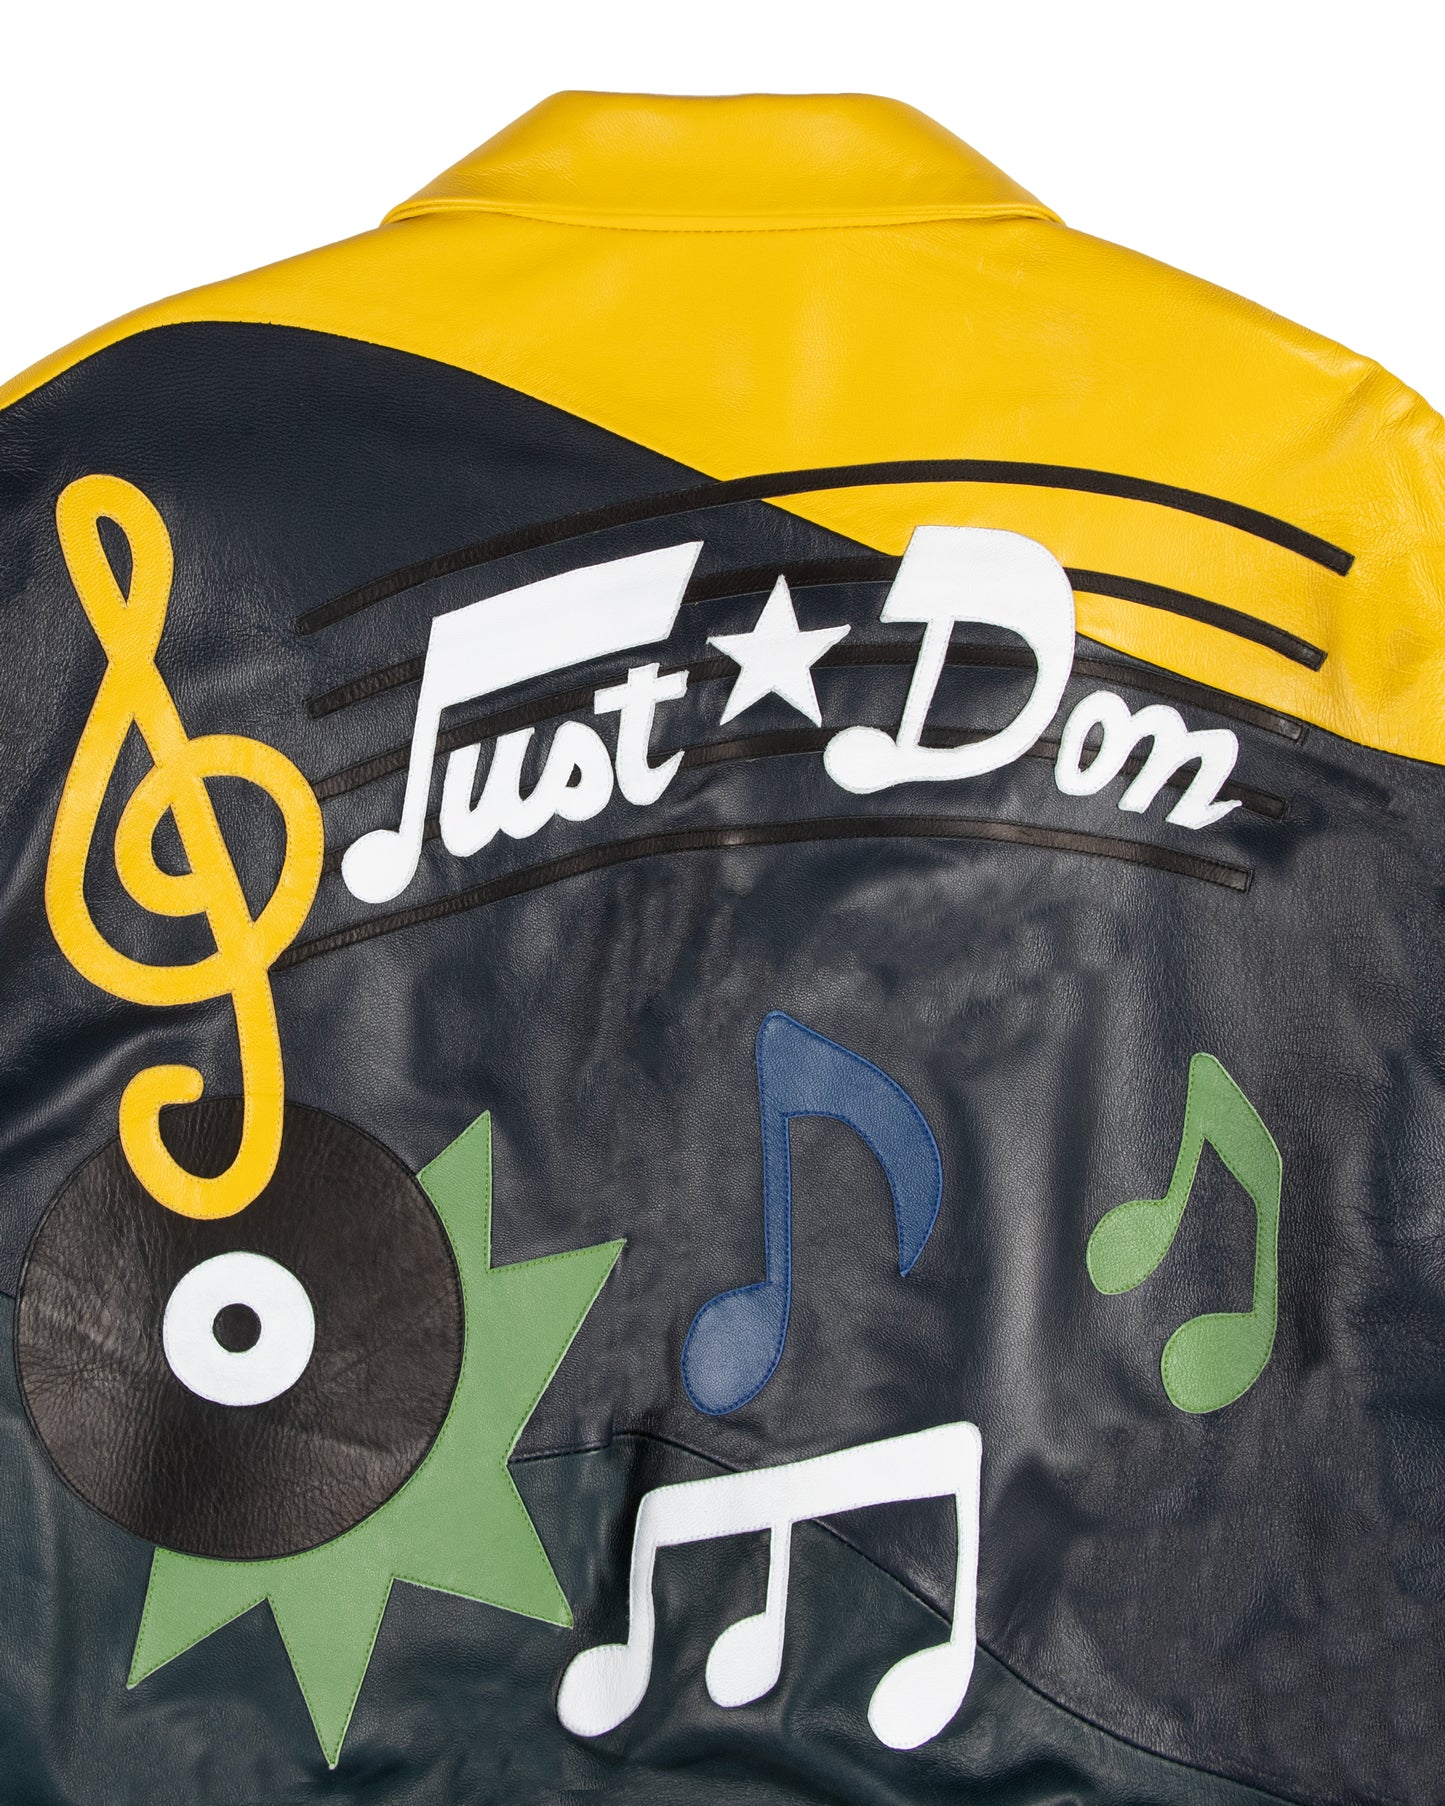 JUST DON SOUNDS LEATHER JACKET